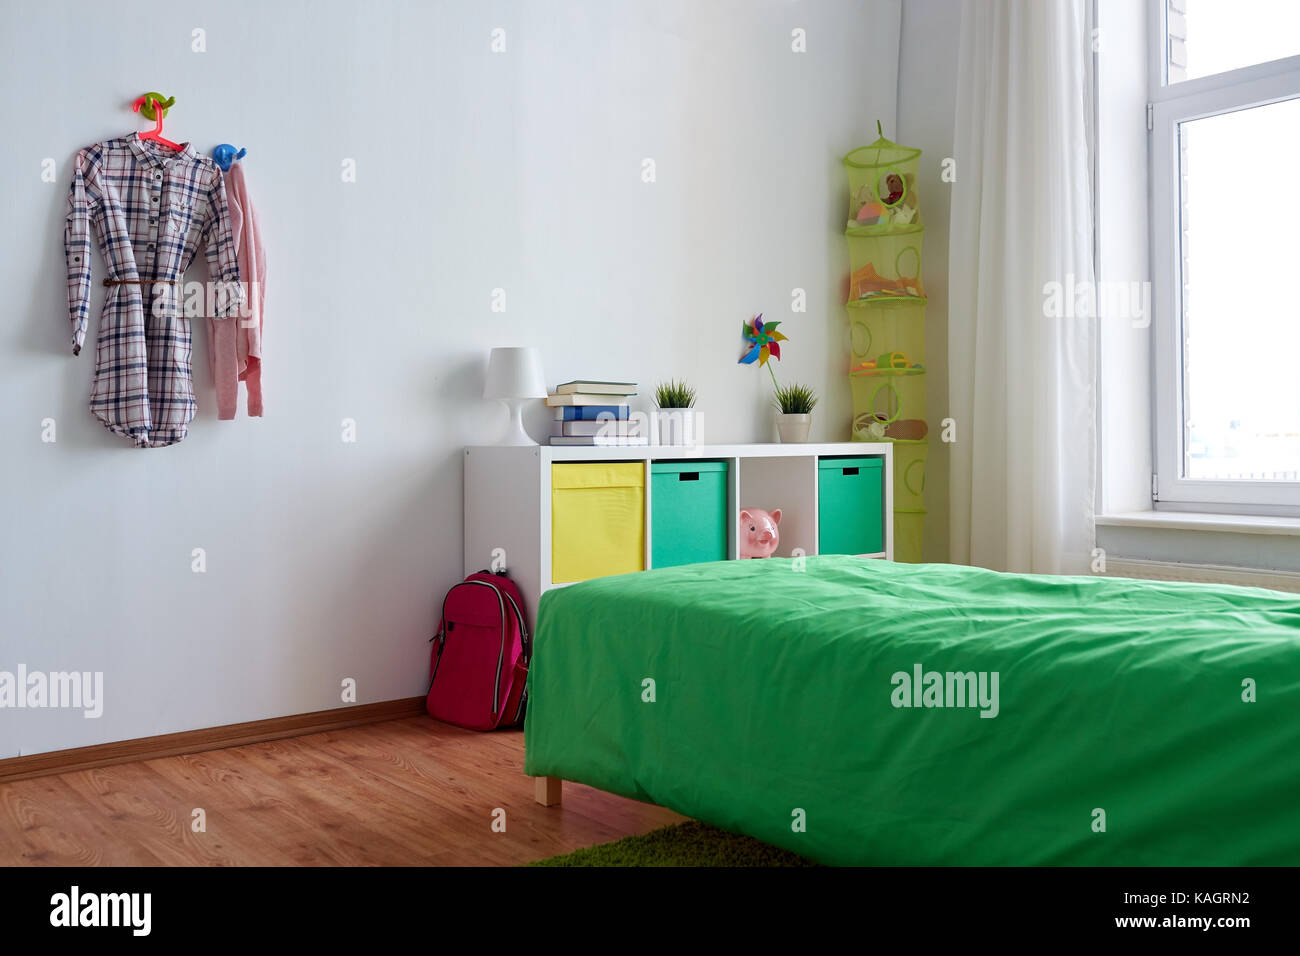 kids room interior with bed, rack and accessories Stock Photo